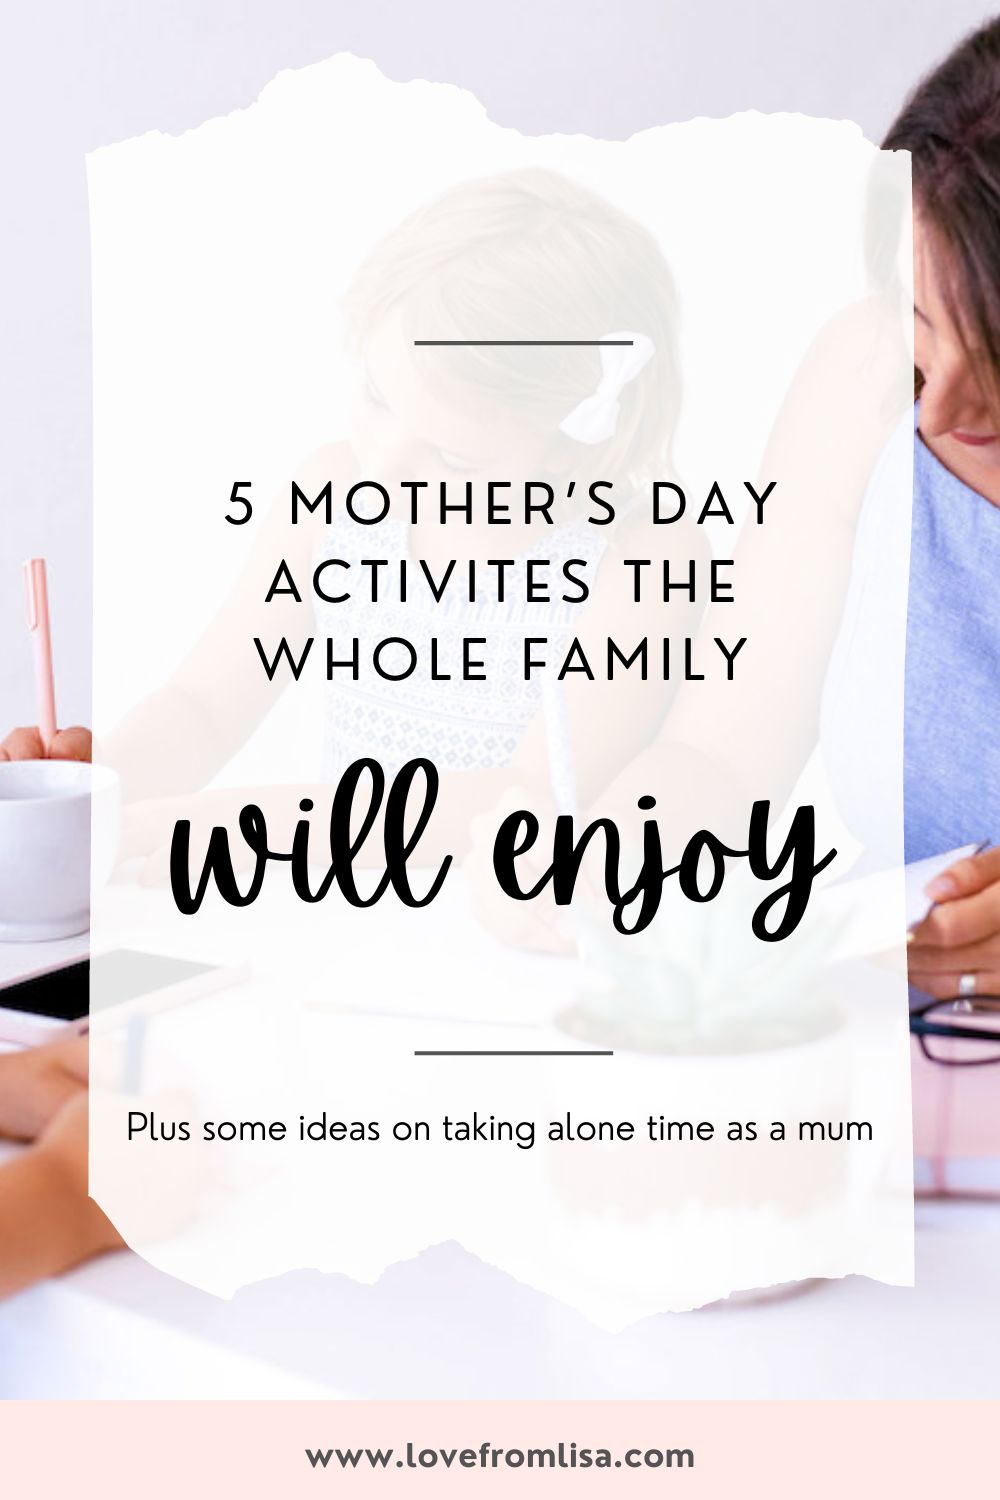 5 Mother’s Day activities the whole family will enjoy Pinterest graphic